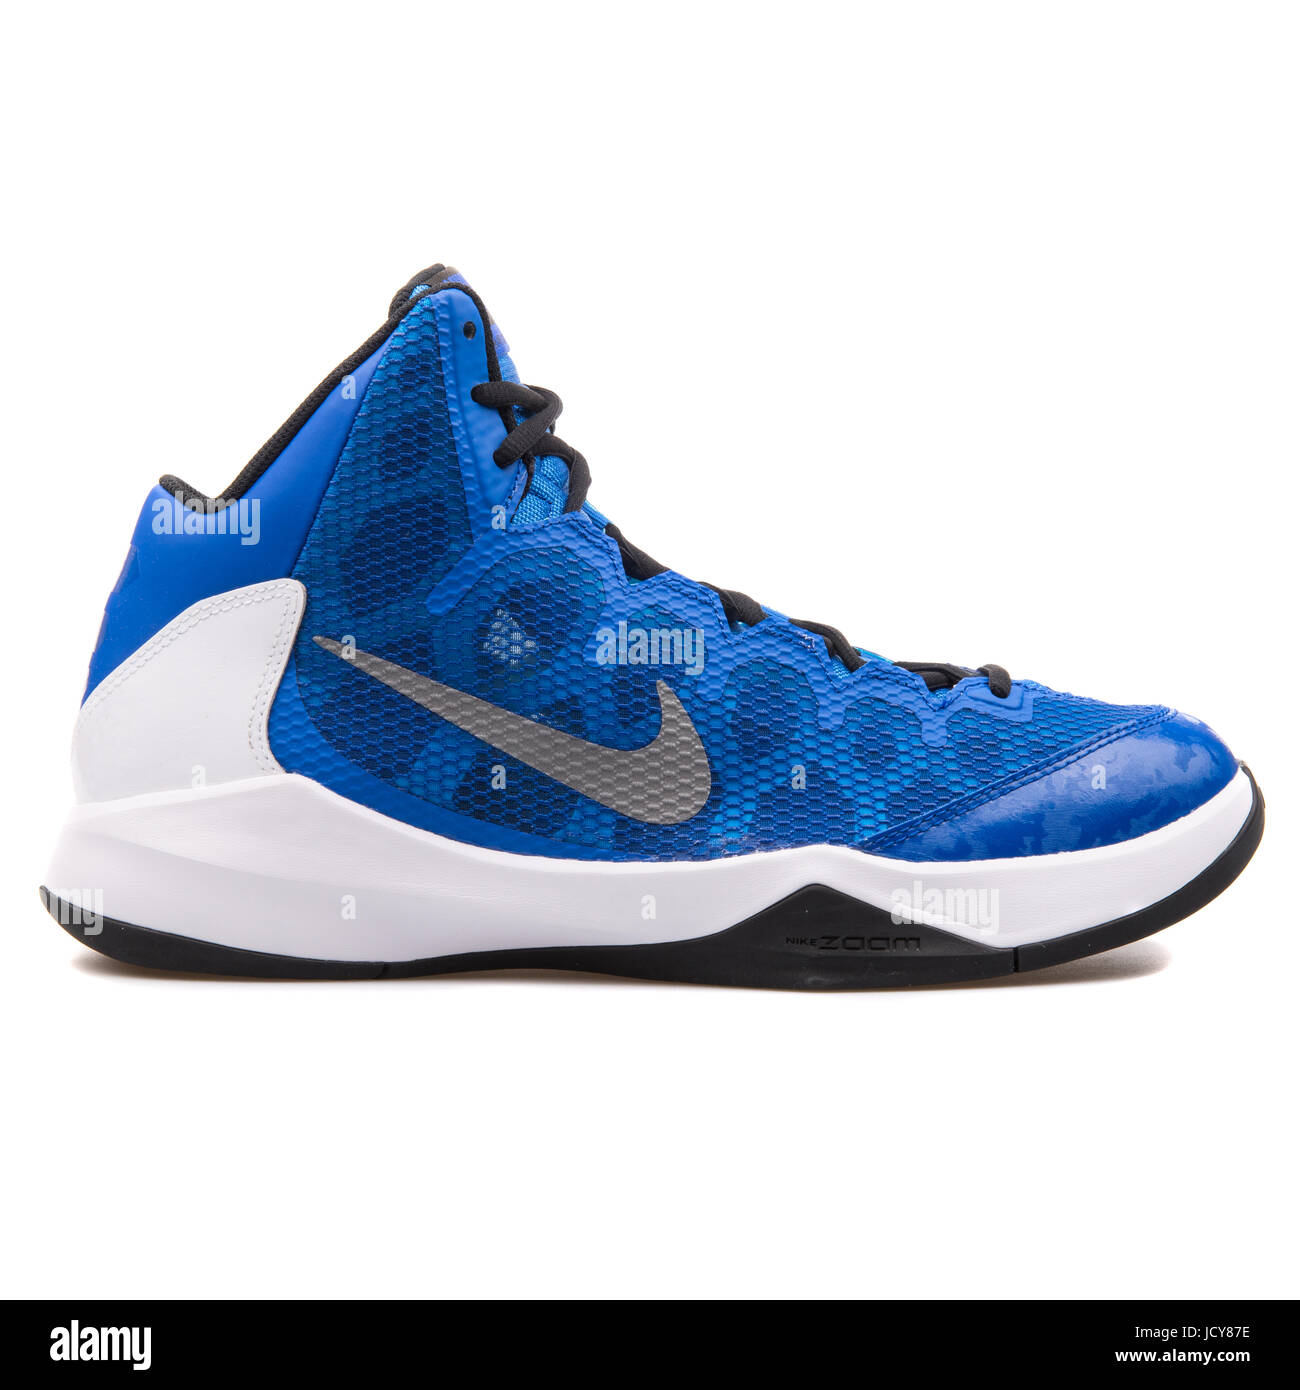 Nike Zoom Without A Doubt Royal Blue and White Men's Basketball Shoes -  749432-401 Stock Photo - Alamy